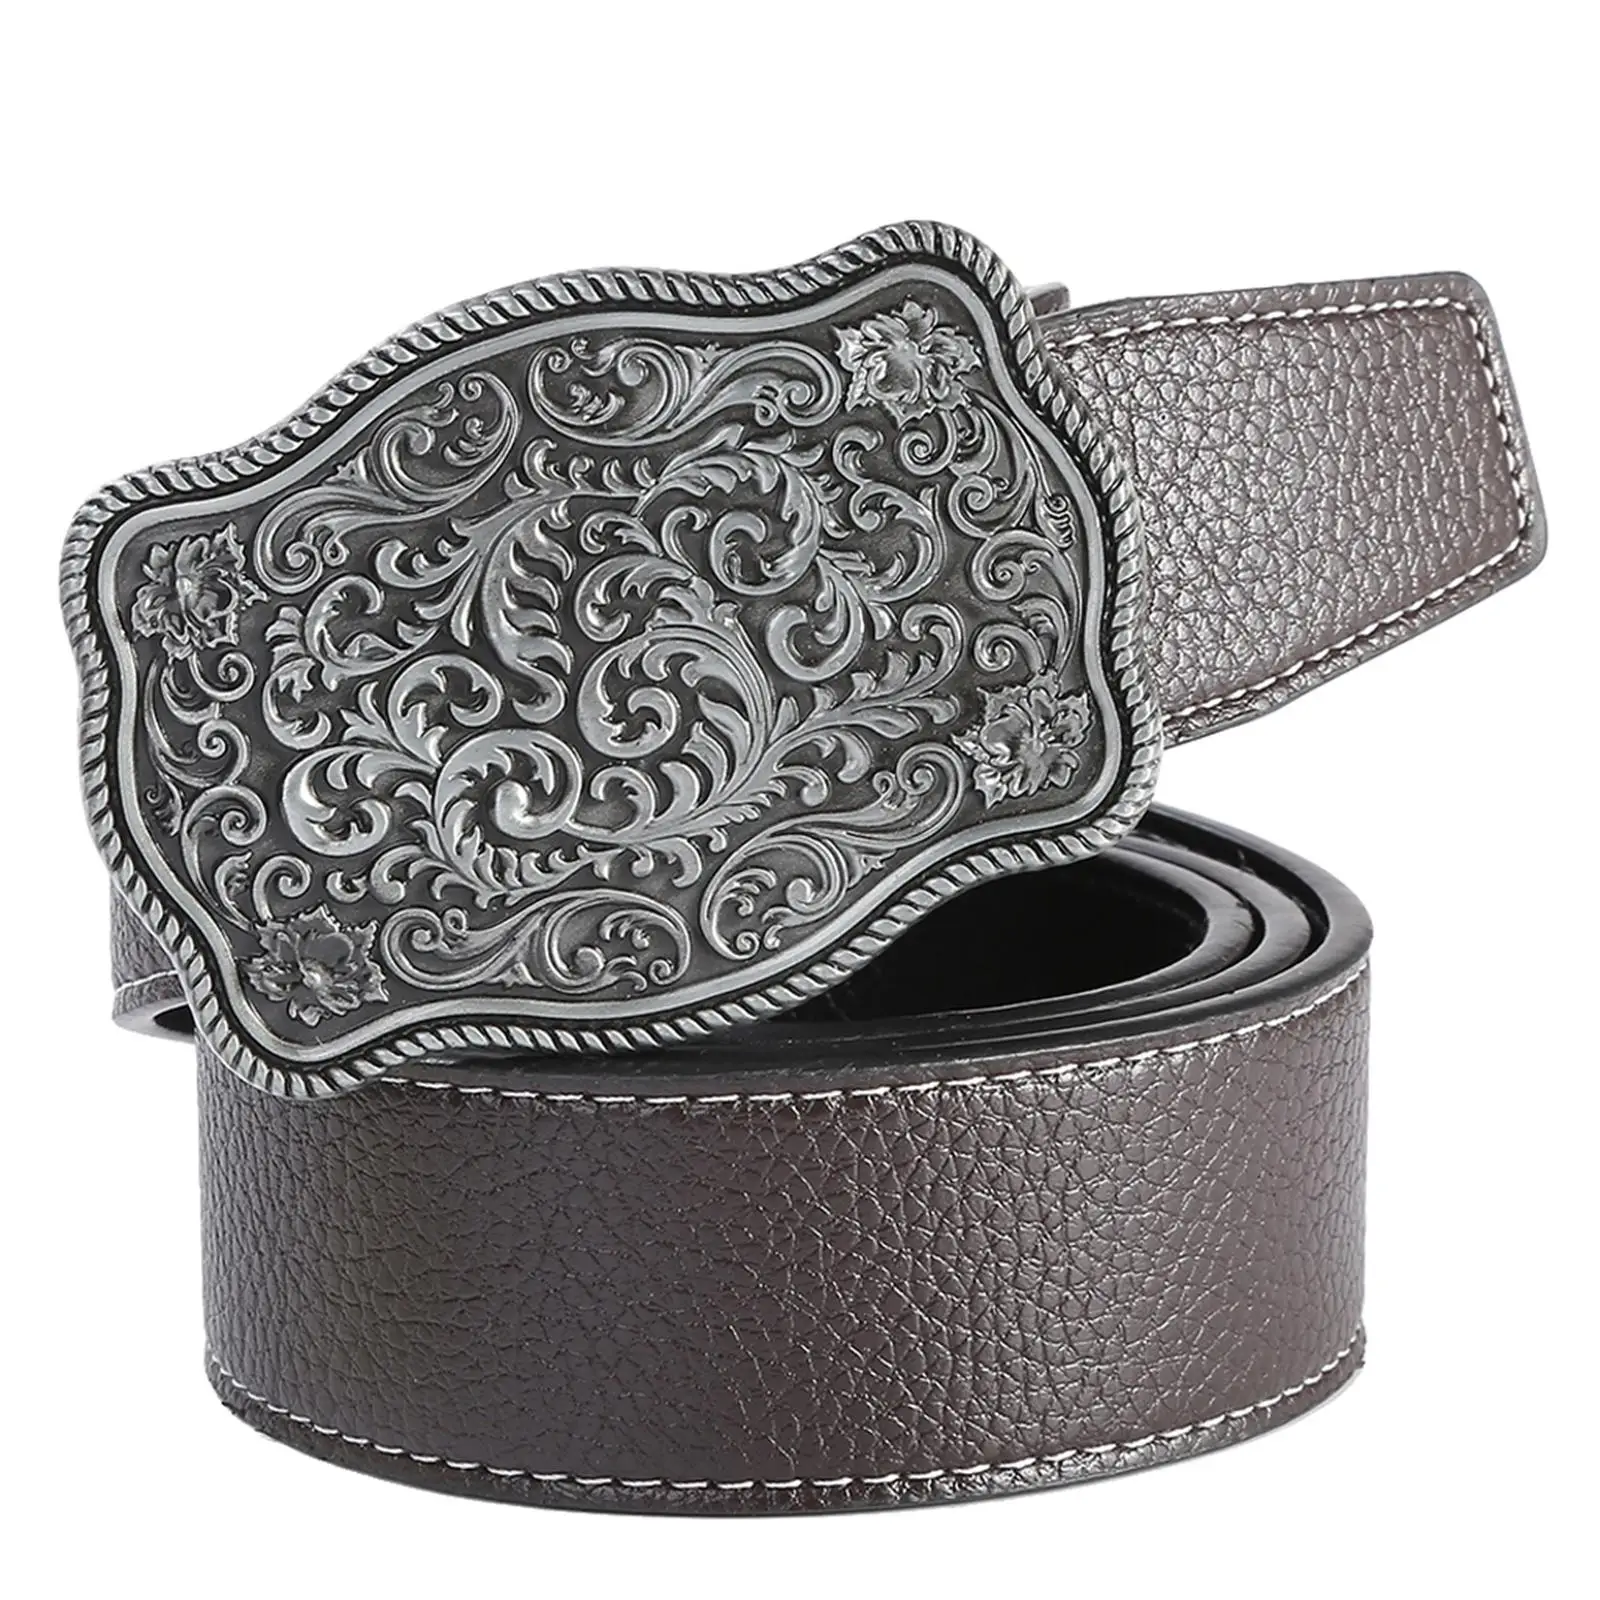 Retro Style Western Belt Mens Leather Belt Jeans Pants Belt Embossed Buckle Clothes Accessories